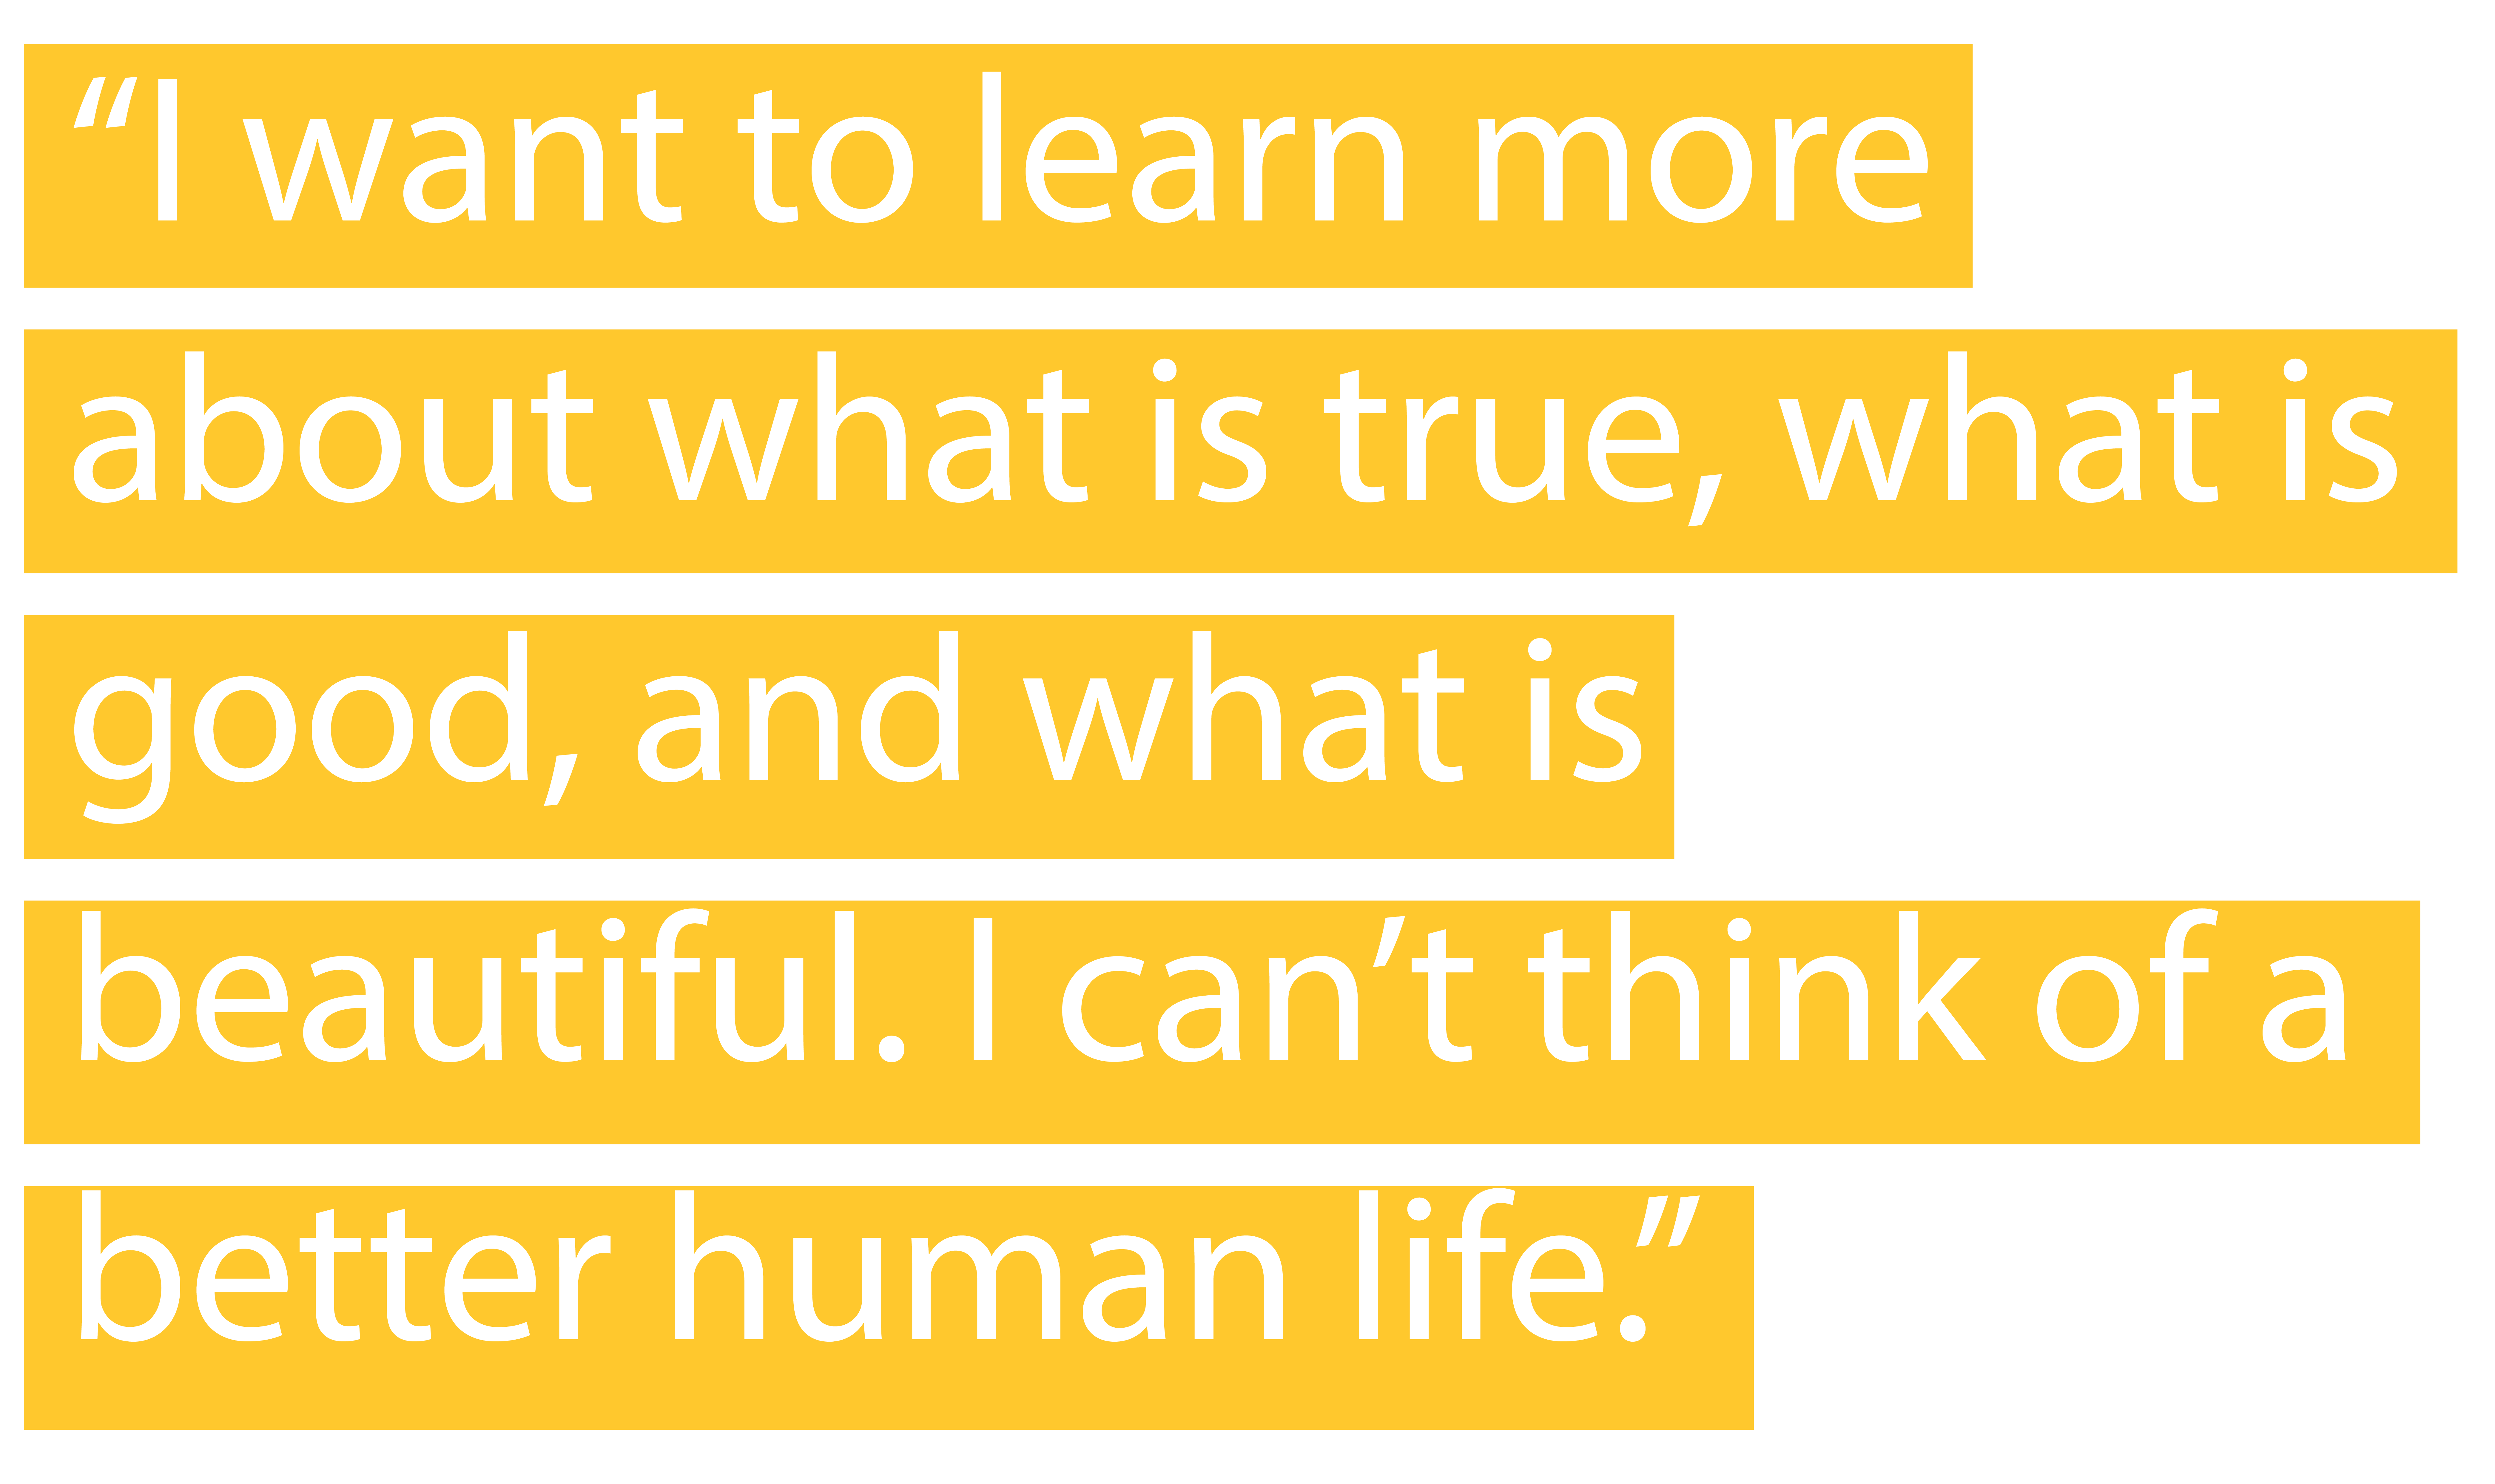 "I want to learn more about what is true, what is good, and what is beautiful. I can’t think of a better human life."